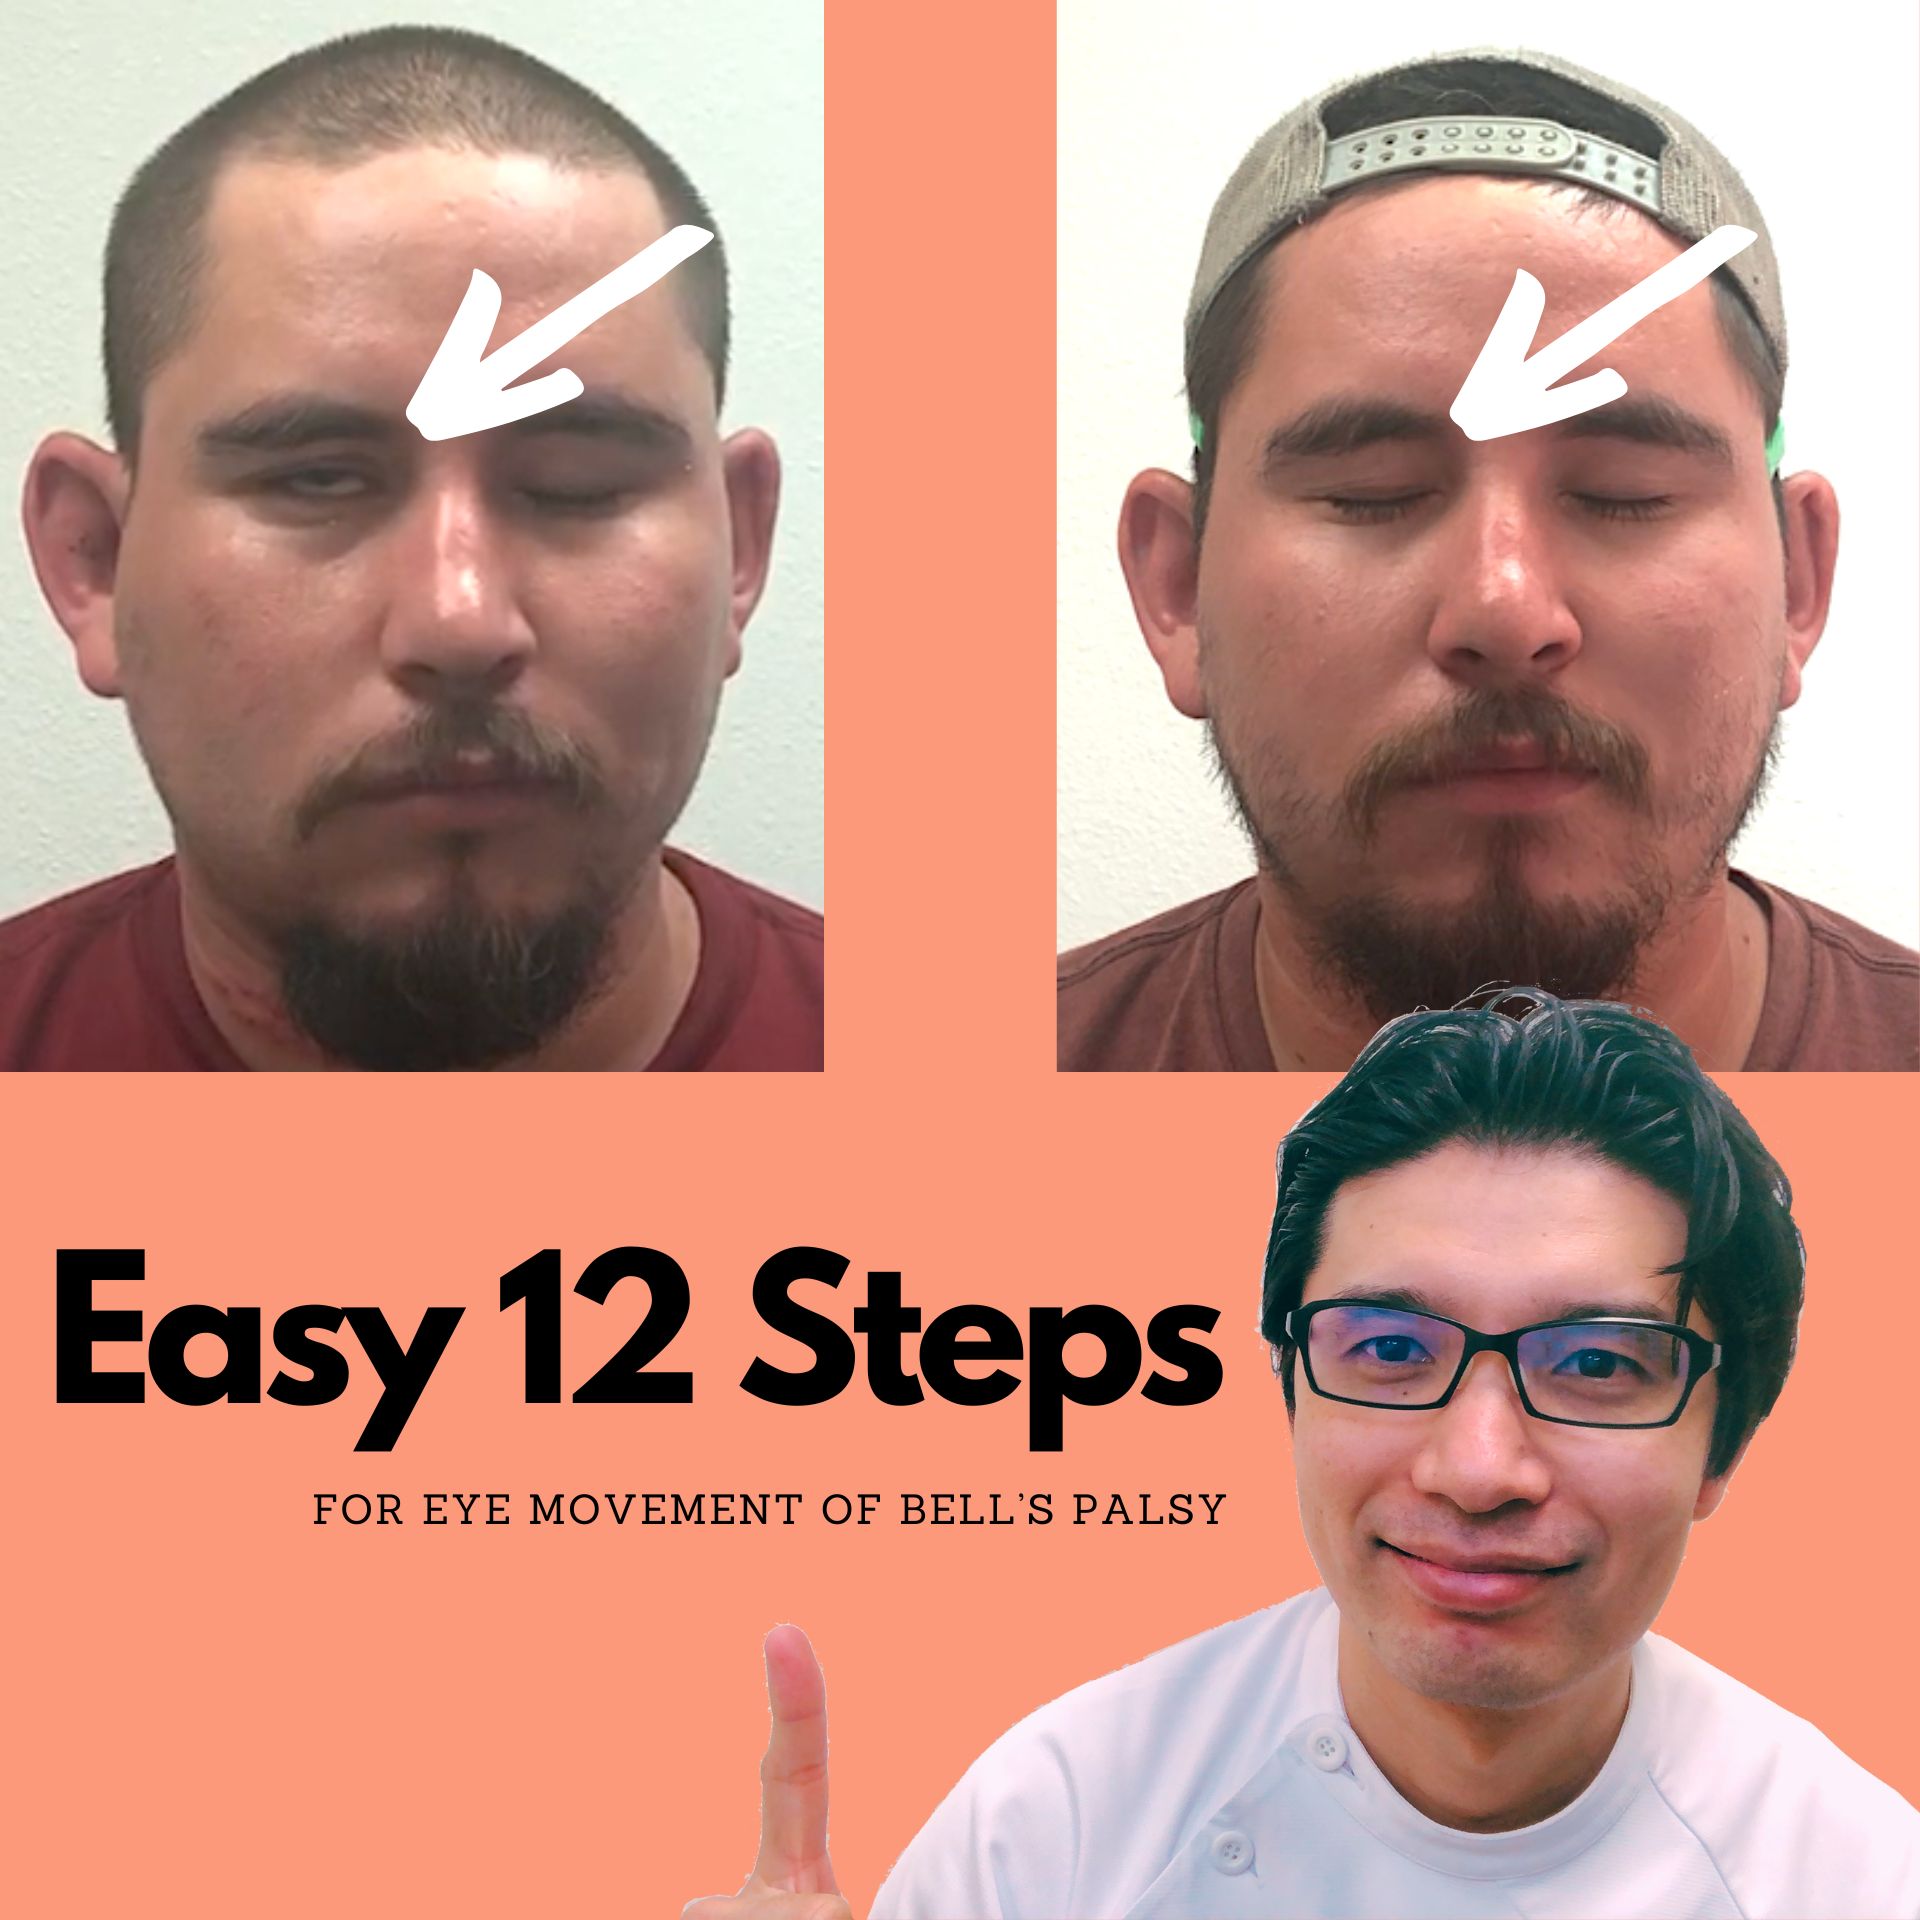 Easy 12 Steps for Bell's Palsy